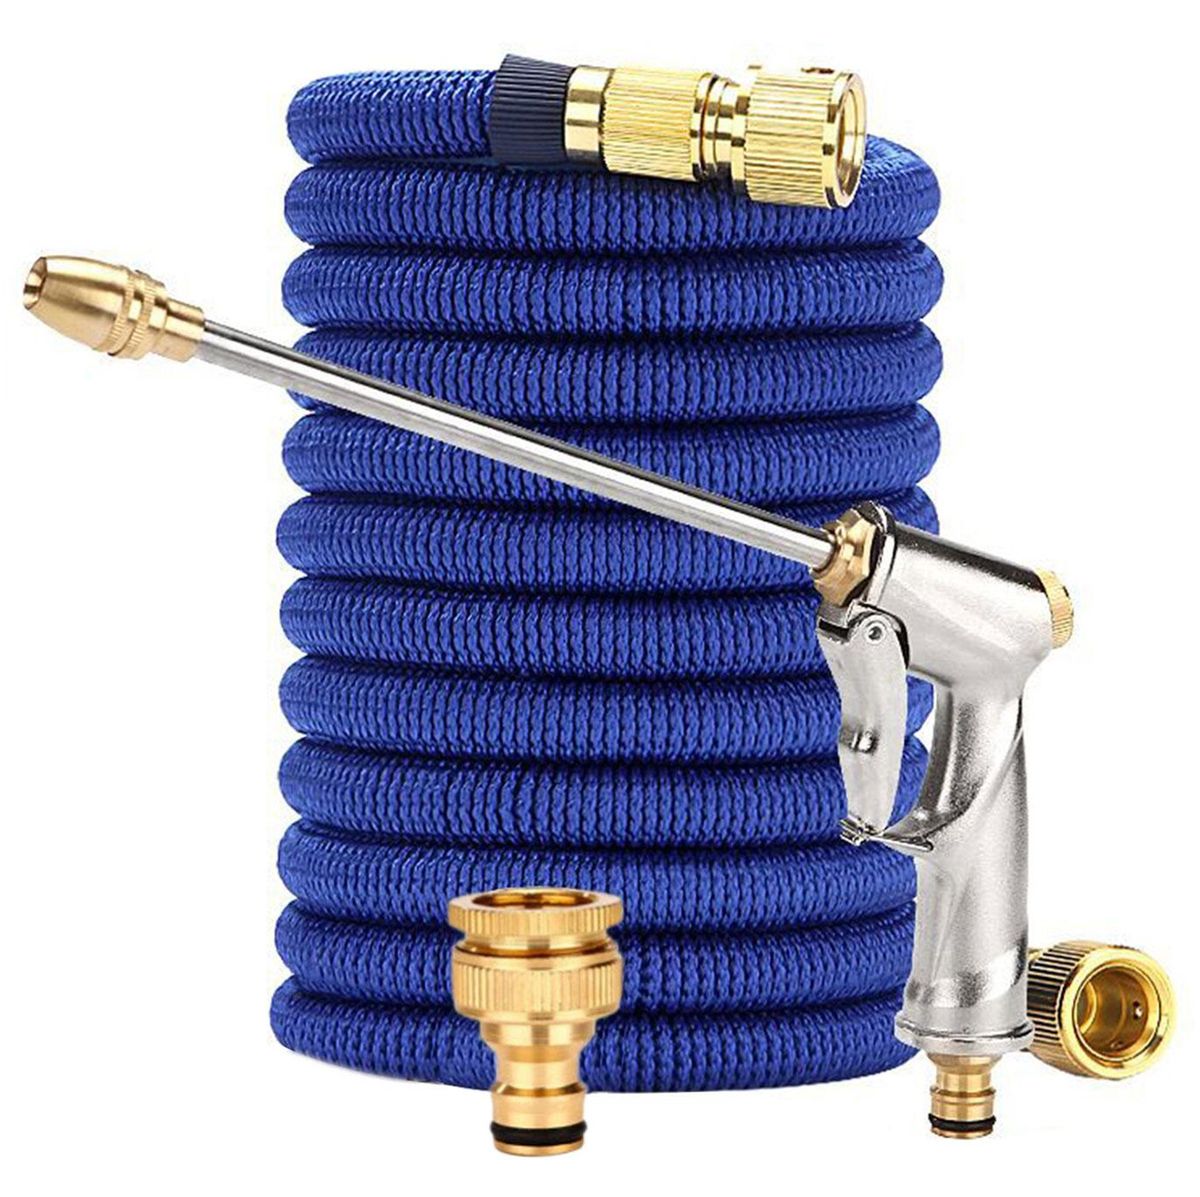 Heavy Duty Expandable Magic Hose Pipe +Brass Fittings + Pressure Washer Gun, Shop Today. Get it Tomorrow!